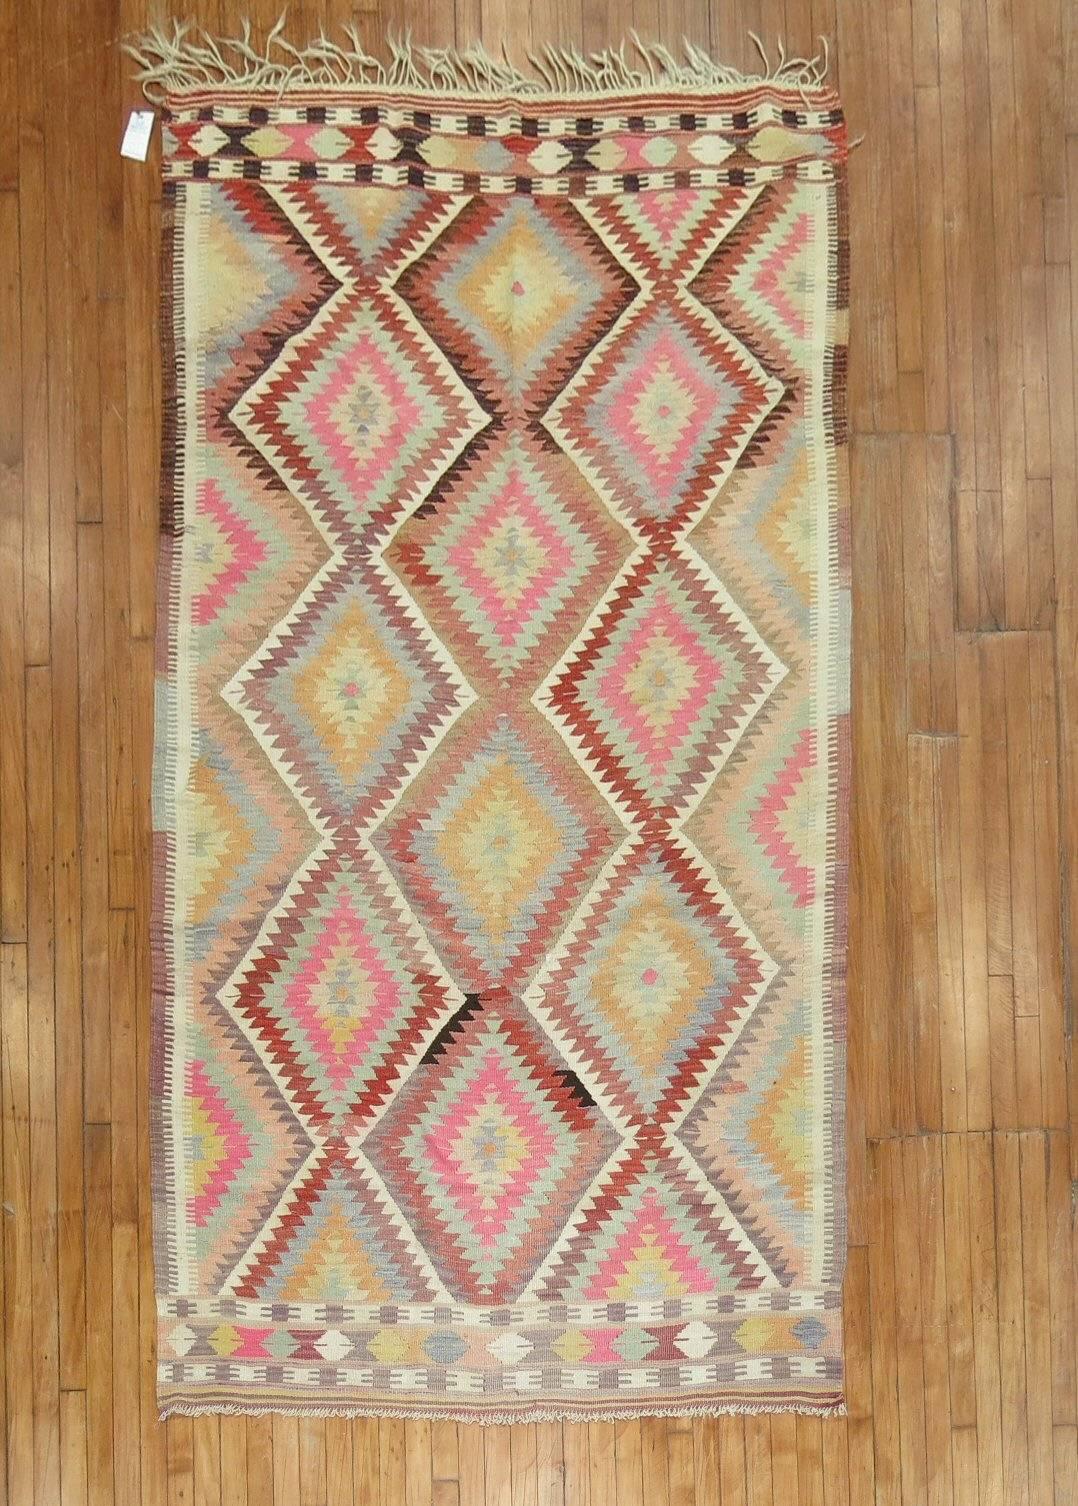 Mid-20th century Turkish Kilim with a fun loving large scalle all-over geometric design